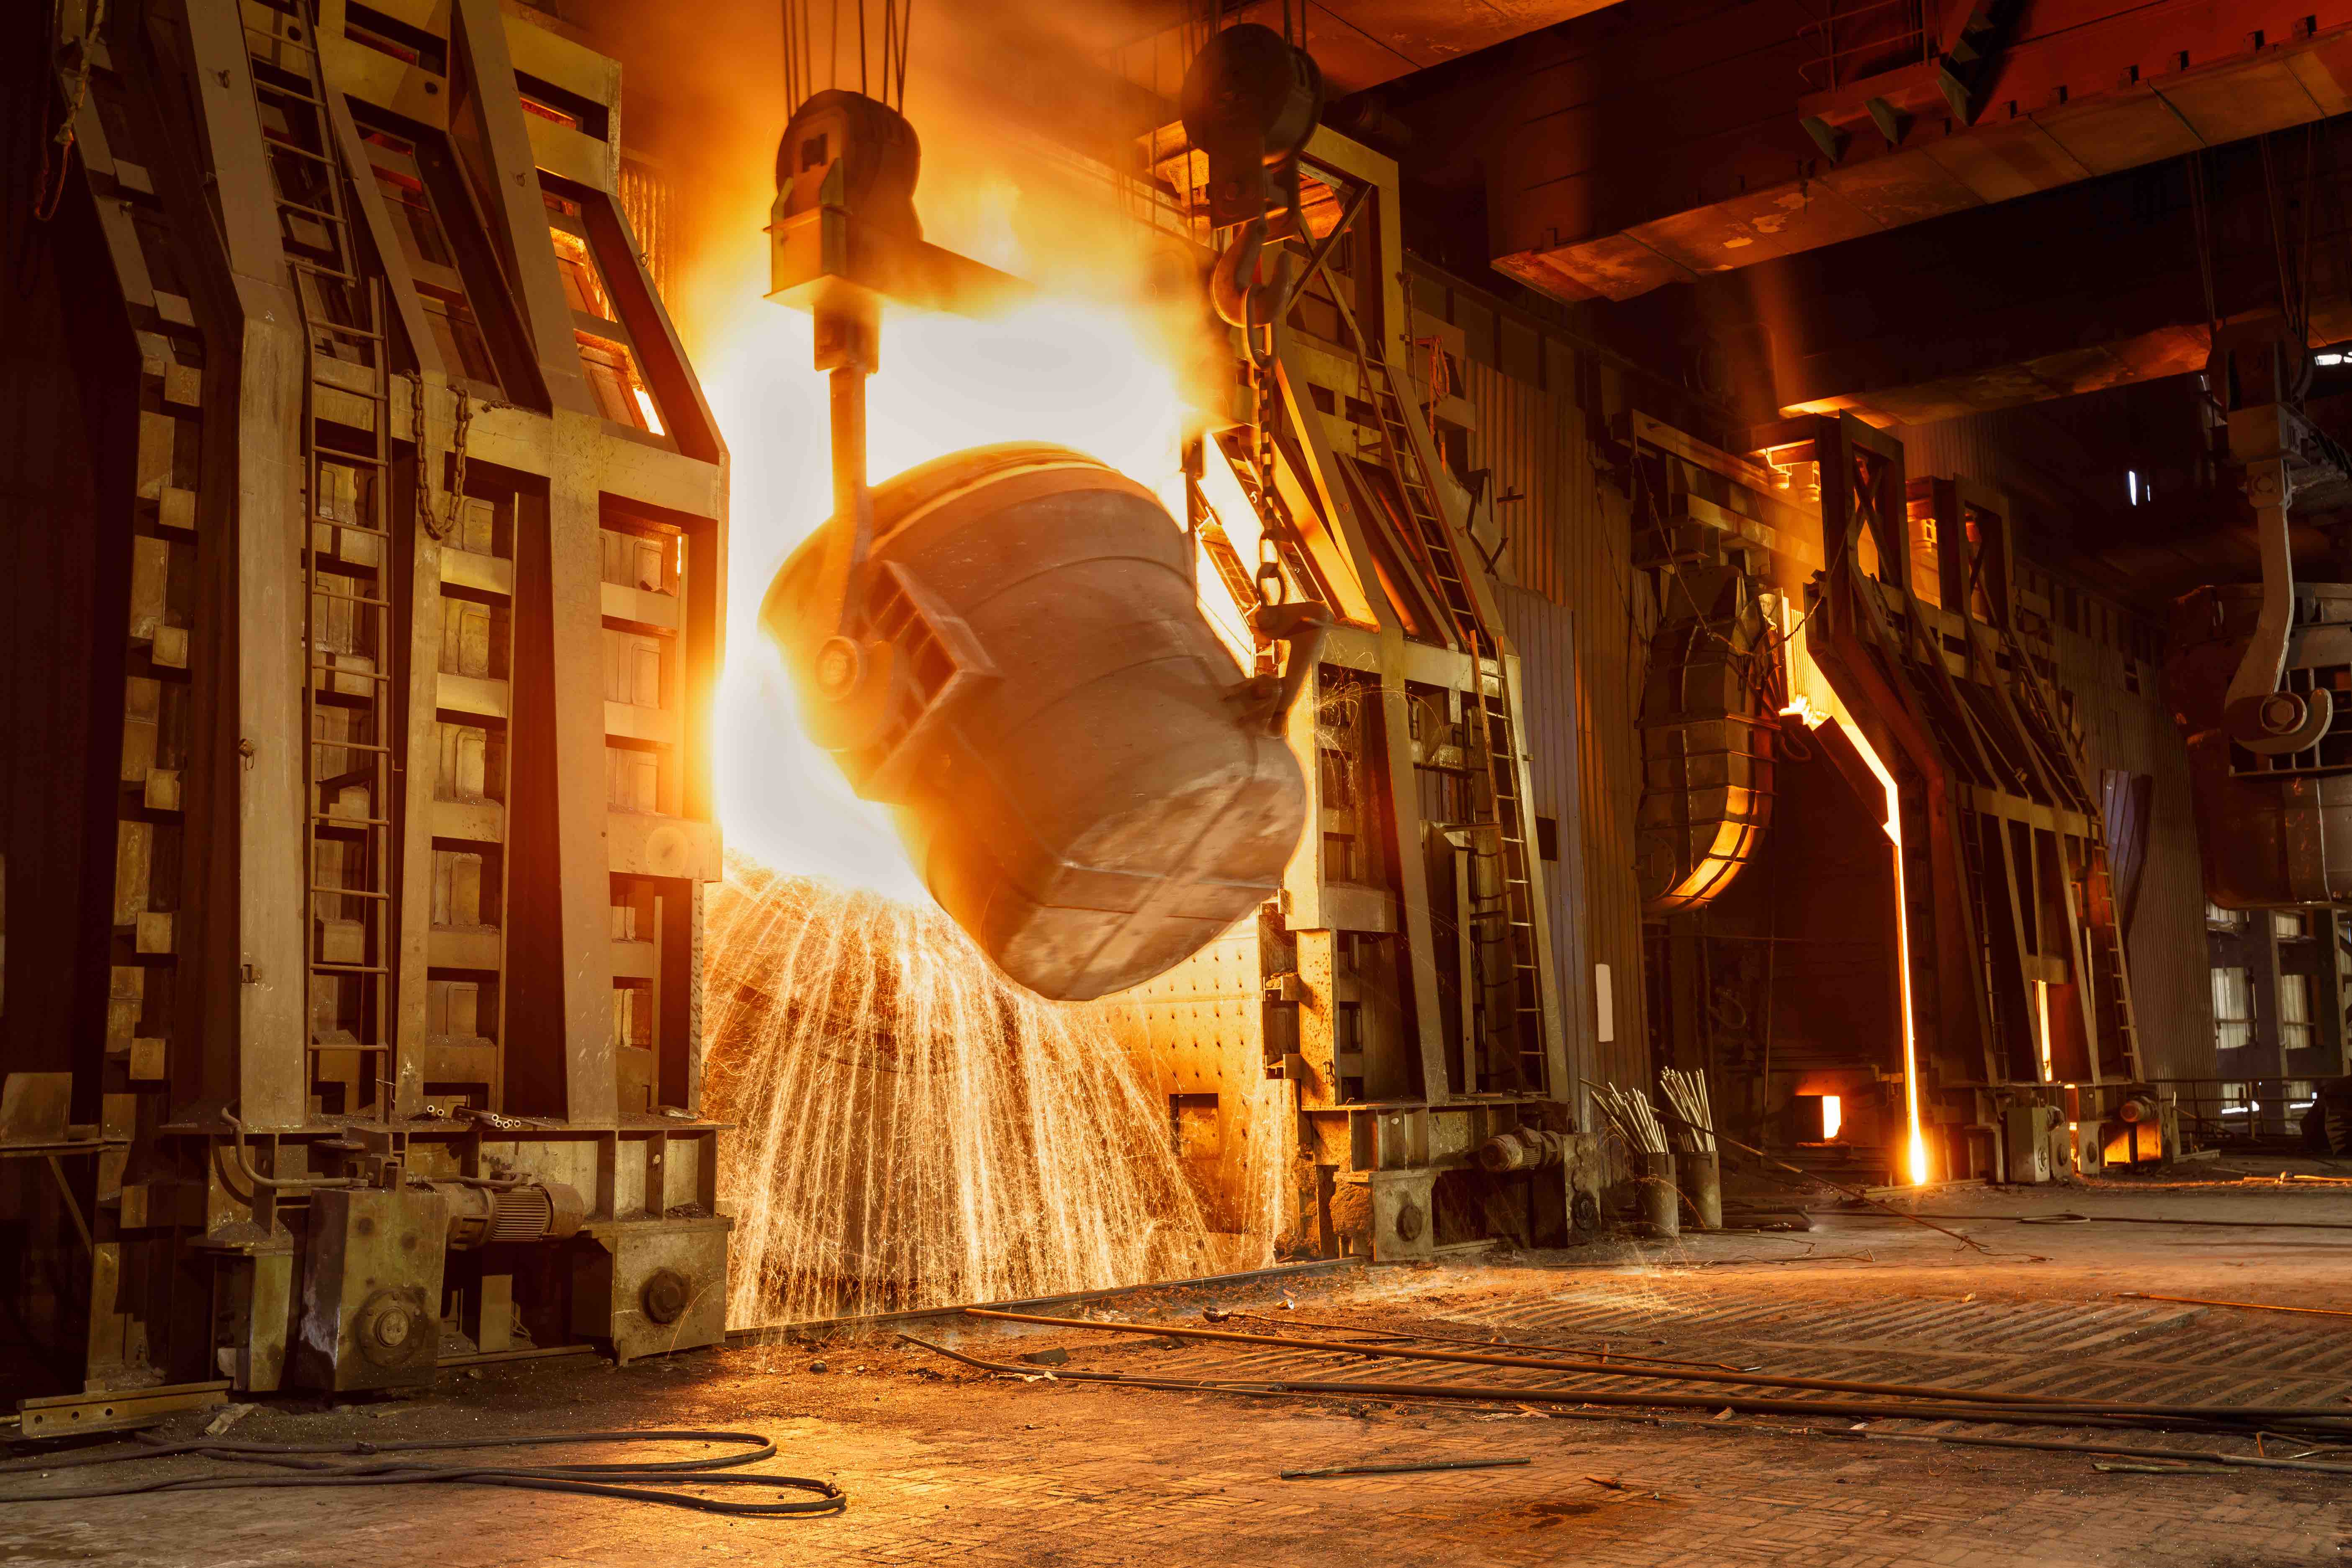 Inconel vs Stainless Steel: Which is Stronger?